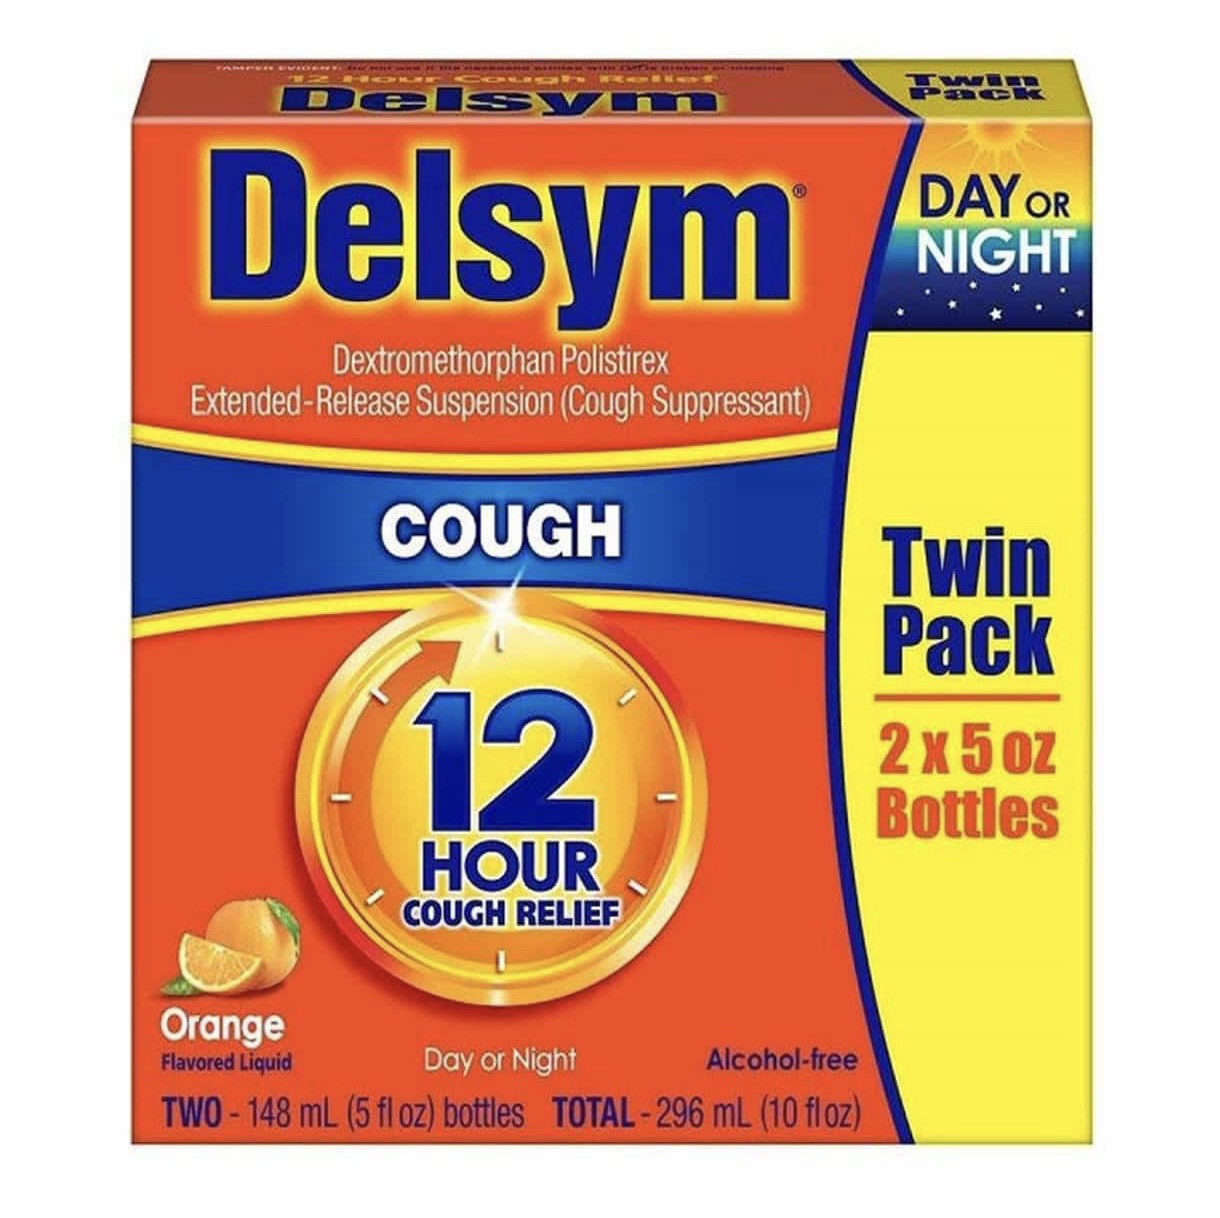 Siro ho Delsym 12 Hour Cough Relief Day or Night 296ml thumbnail